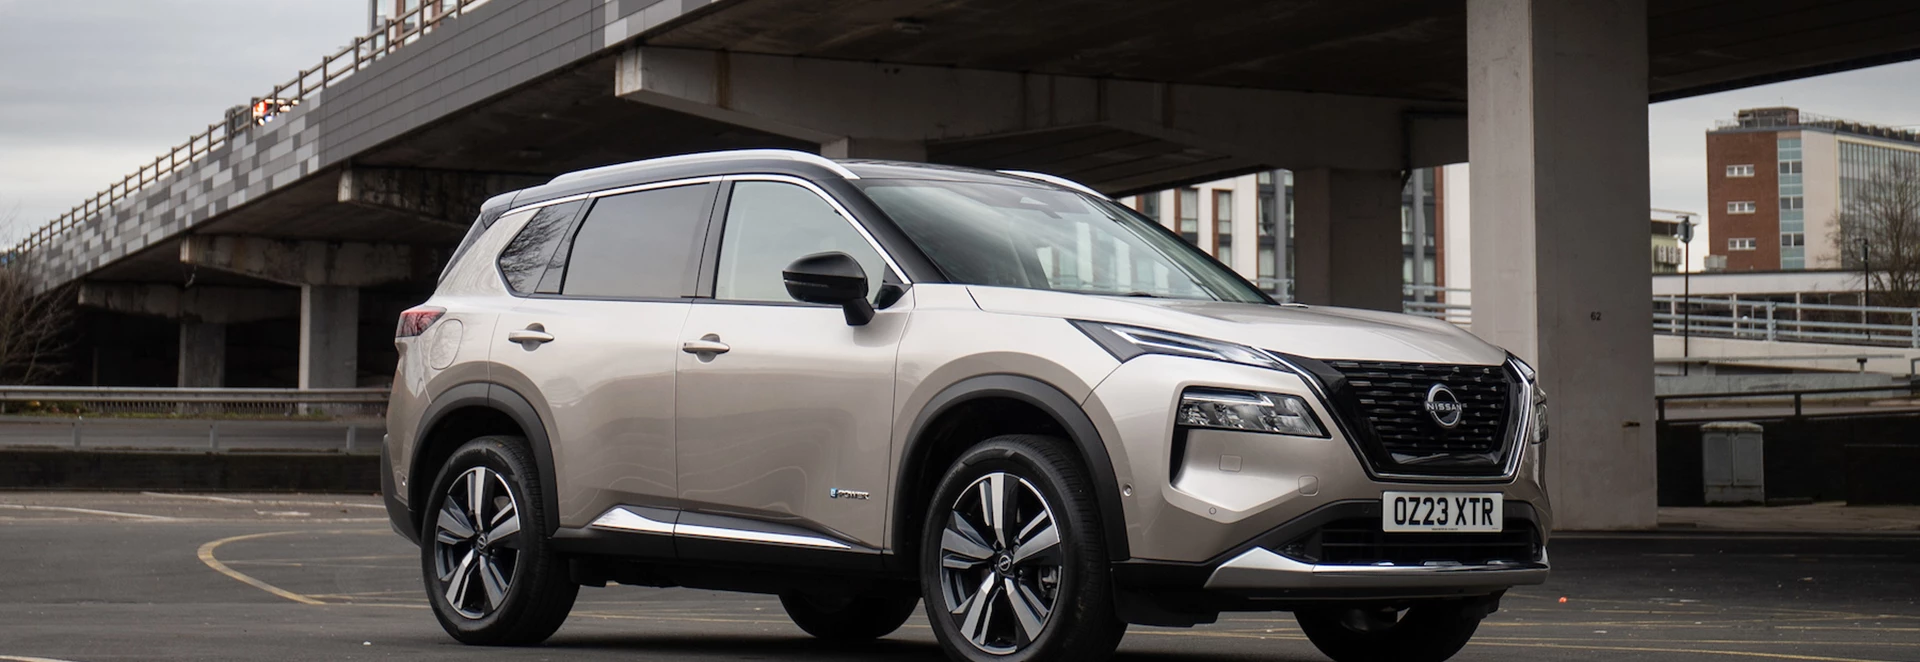 5 reasons to look at a new Nissan X-Trail 